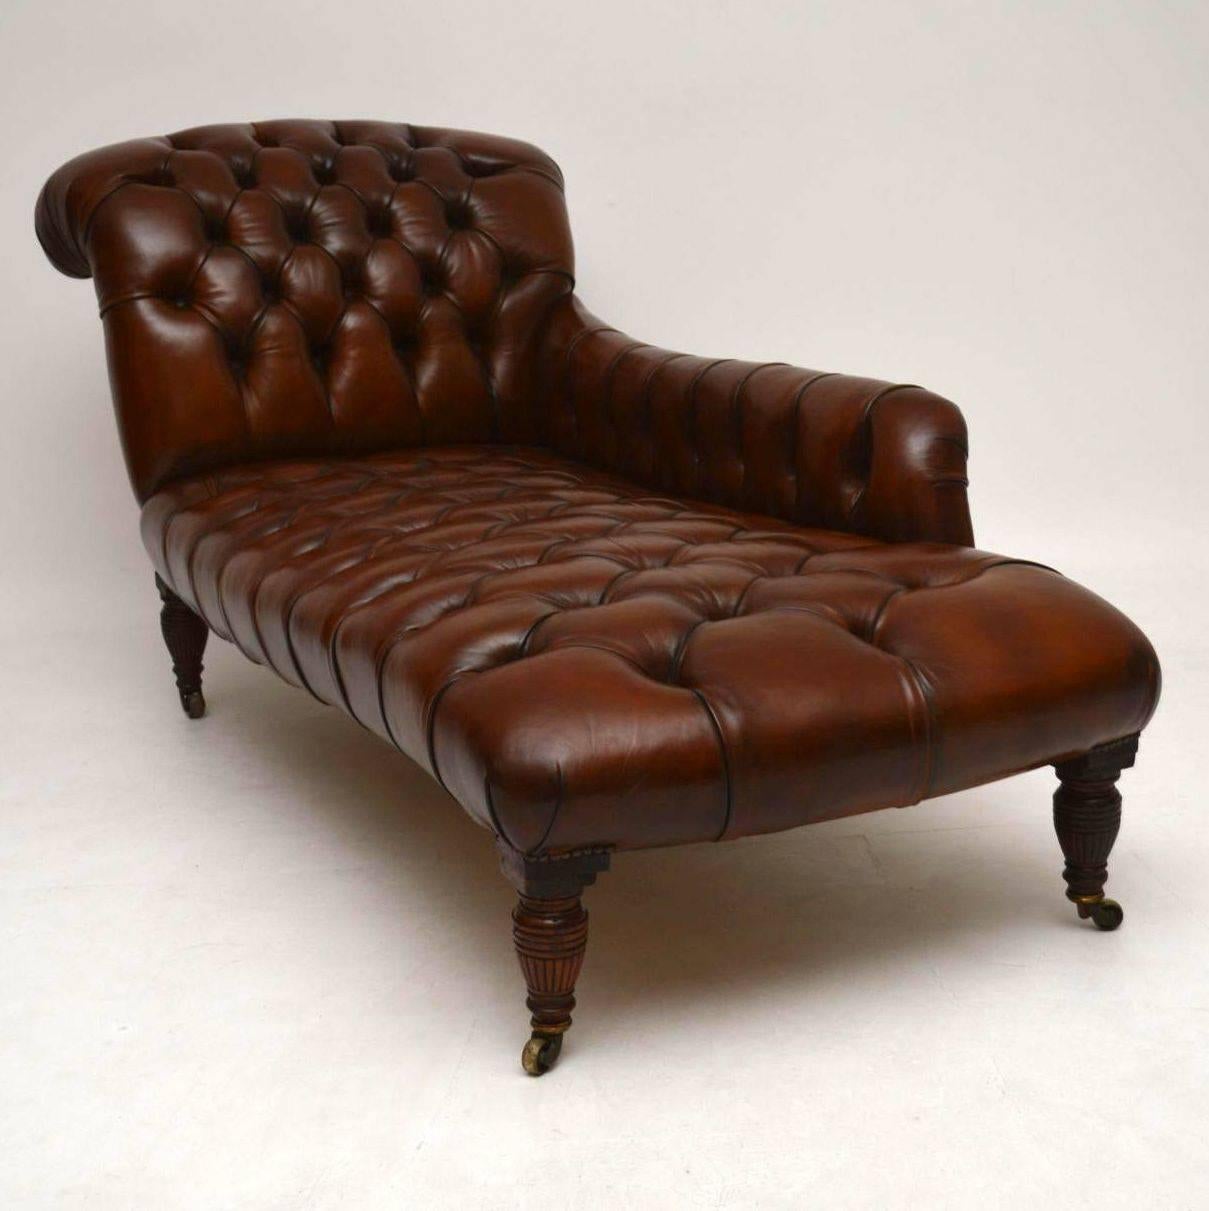 Mid-19th Century Antique Victorian Deep Buttoned Leather Chaise Longue